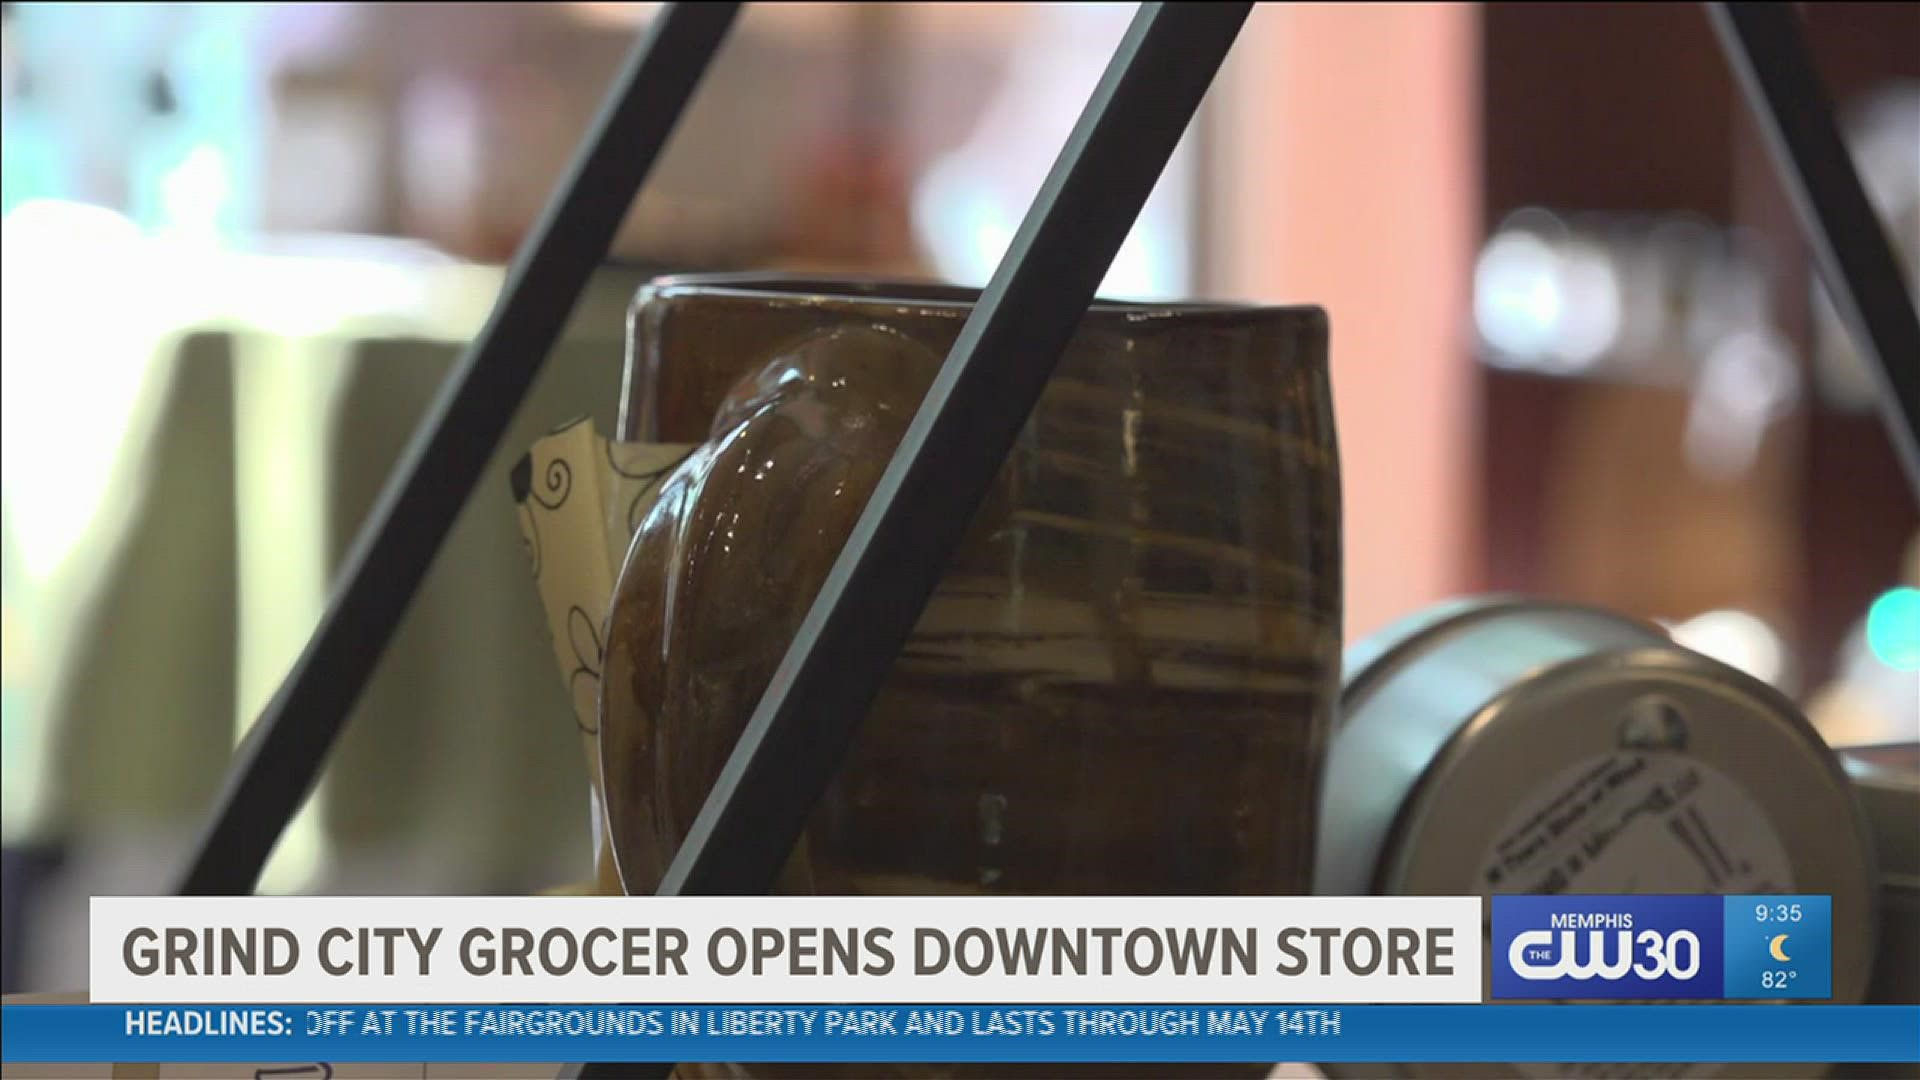 The store is thriving just a month after opening downtown.